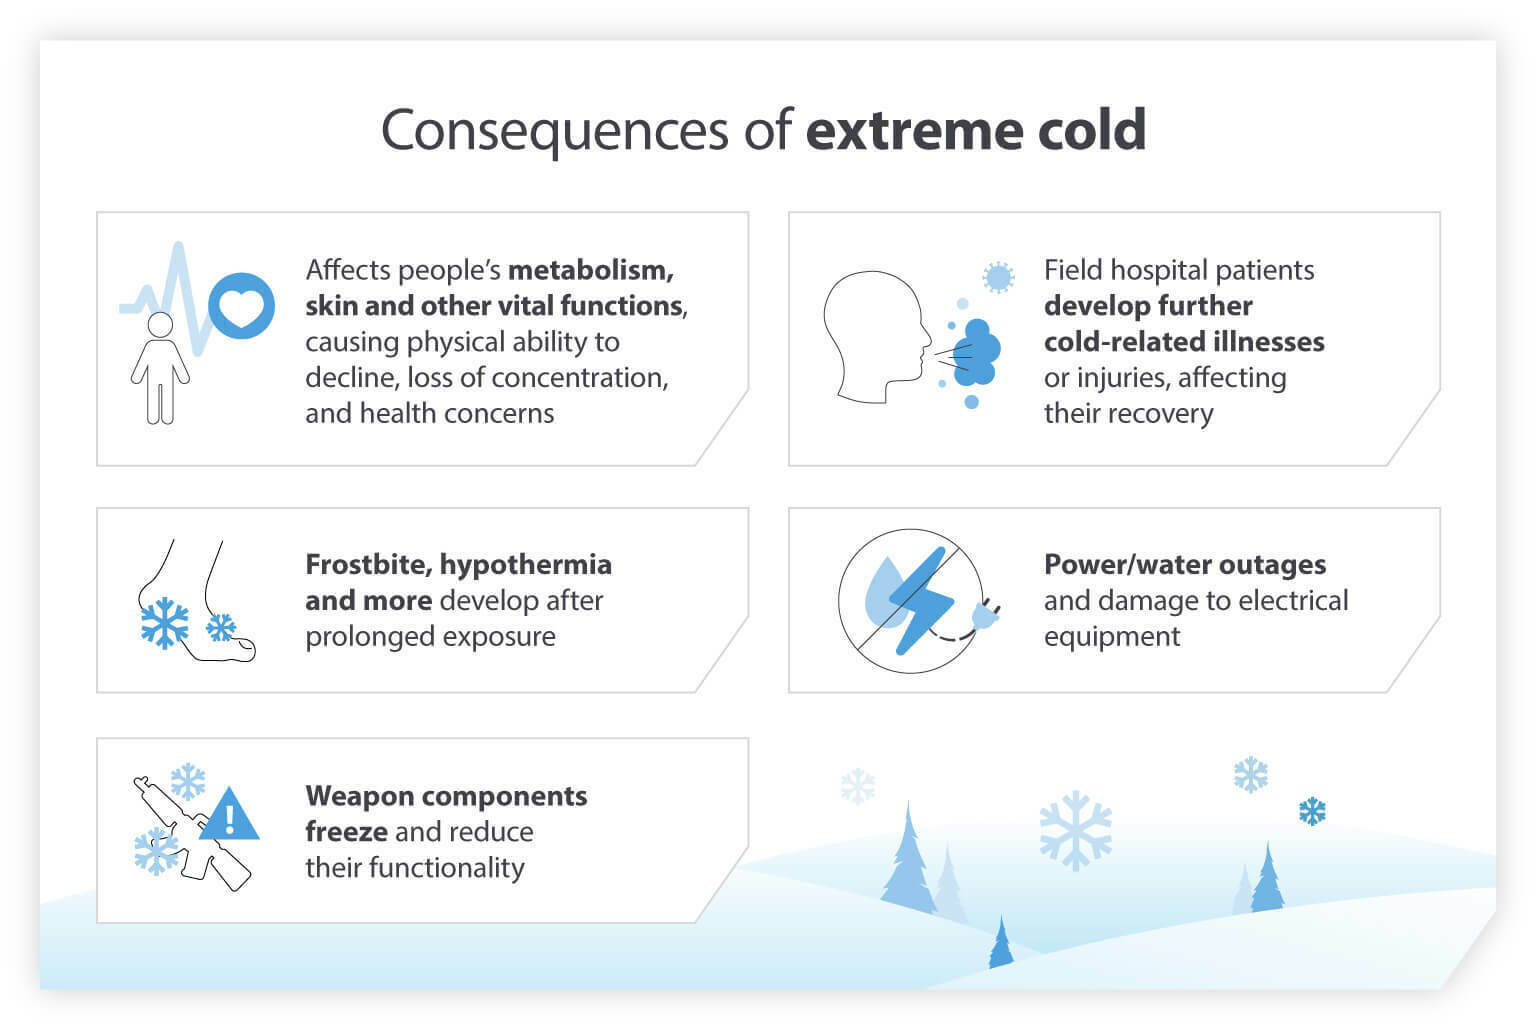 Consequences of extreme cold